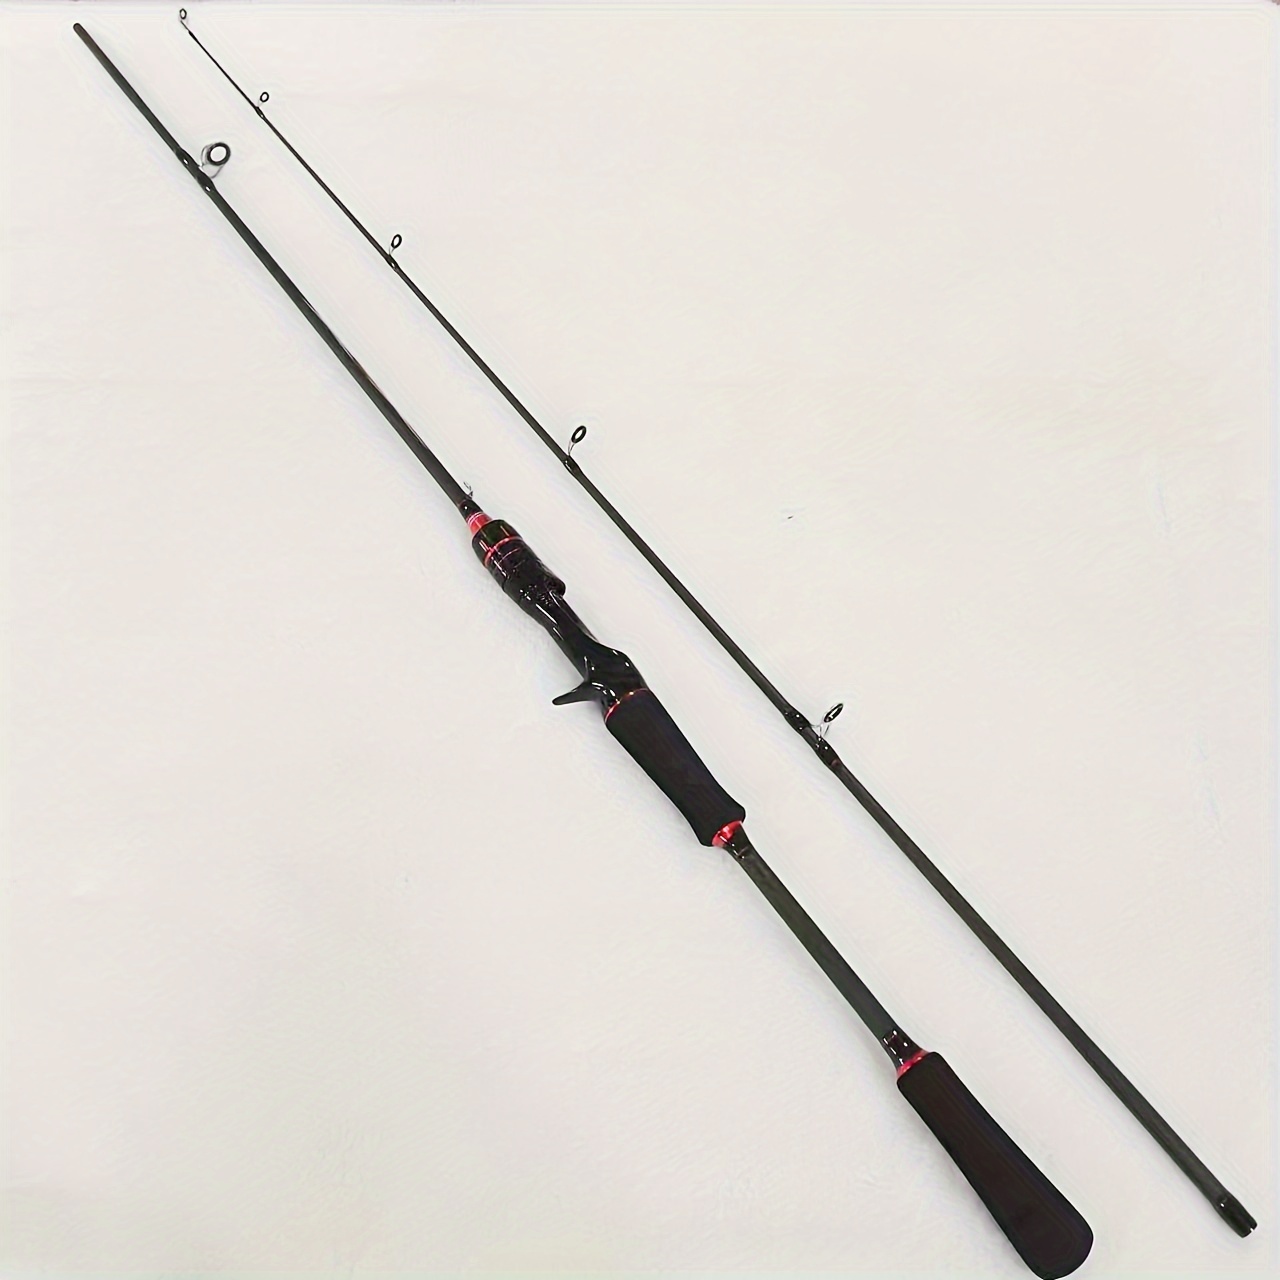 

Premium Carbon Fiber Casting Rod With Adjustable Handle - Long-distance, Lightweight For Freshwater & Saltwater Fishing